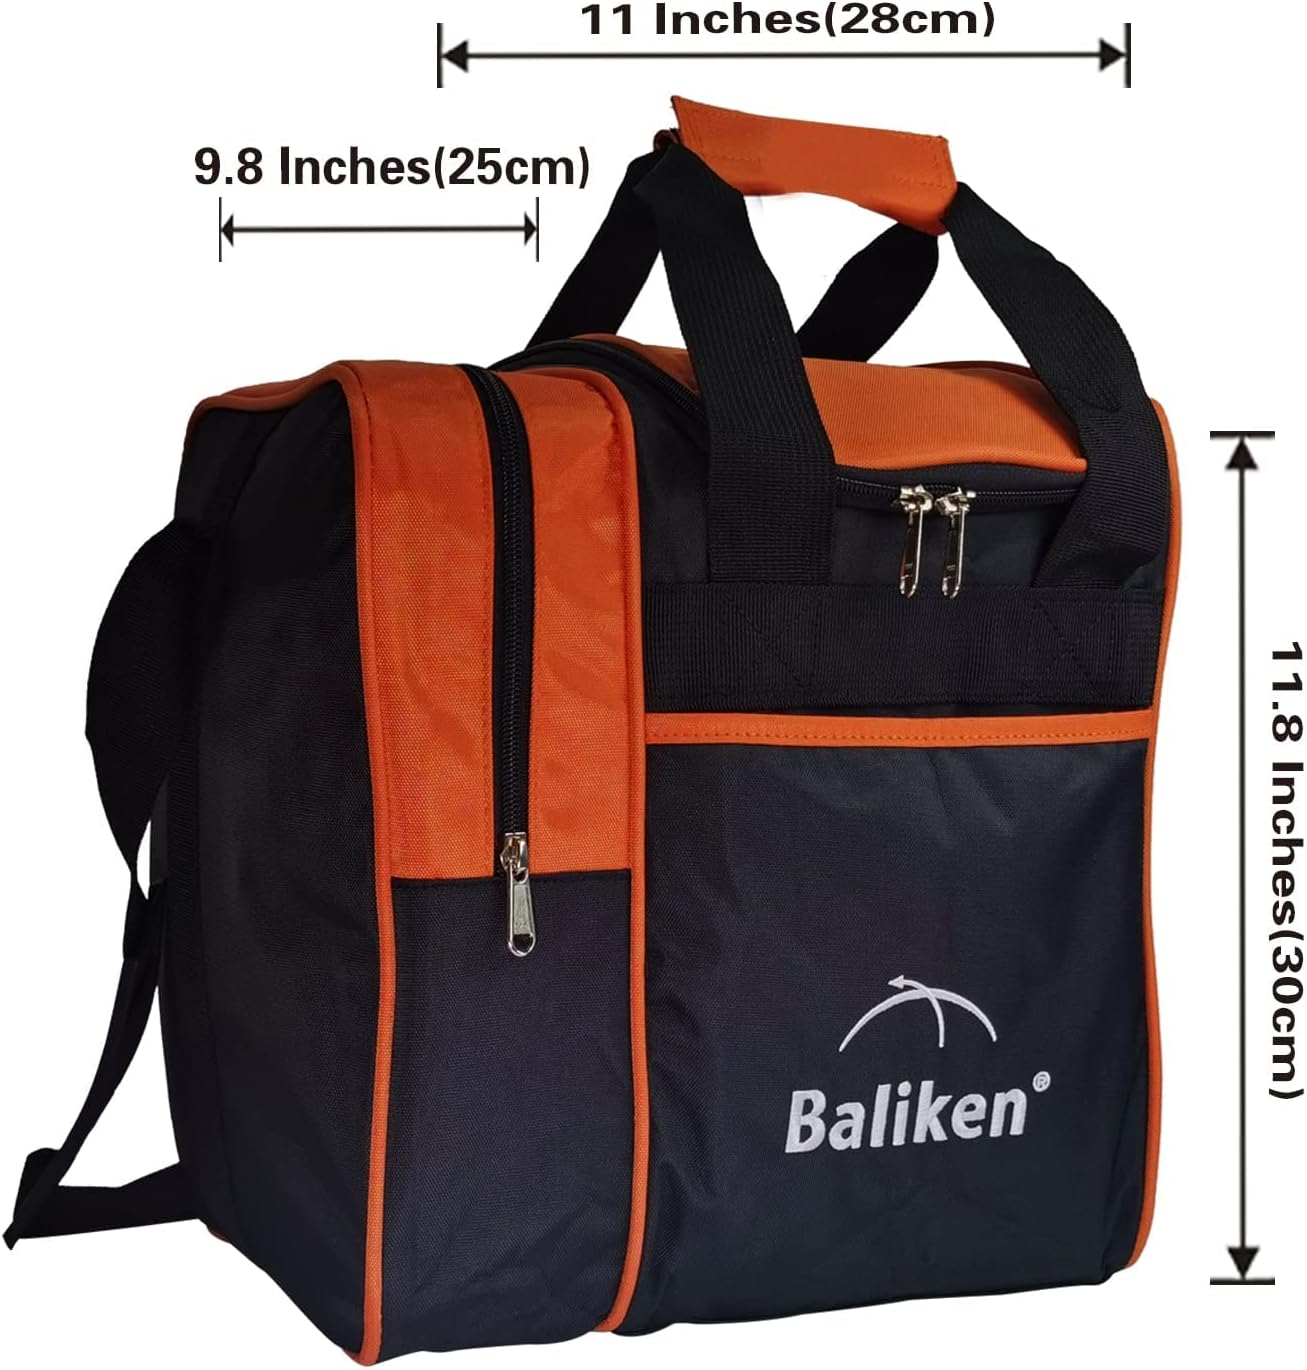 BALIKEN Single Bowling Ball Tote Bag Holds One Bowling Ball One Pair of Bowling Shoes Up to Size 11 Men’s Shoes